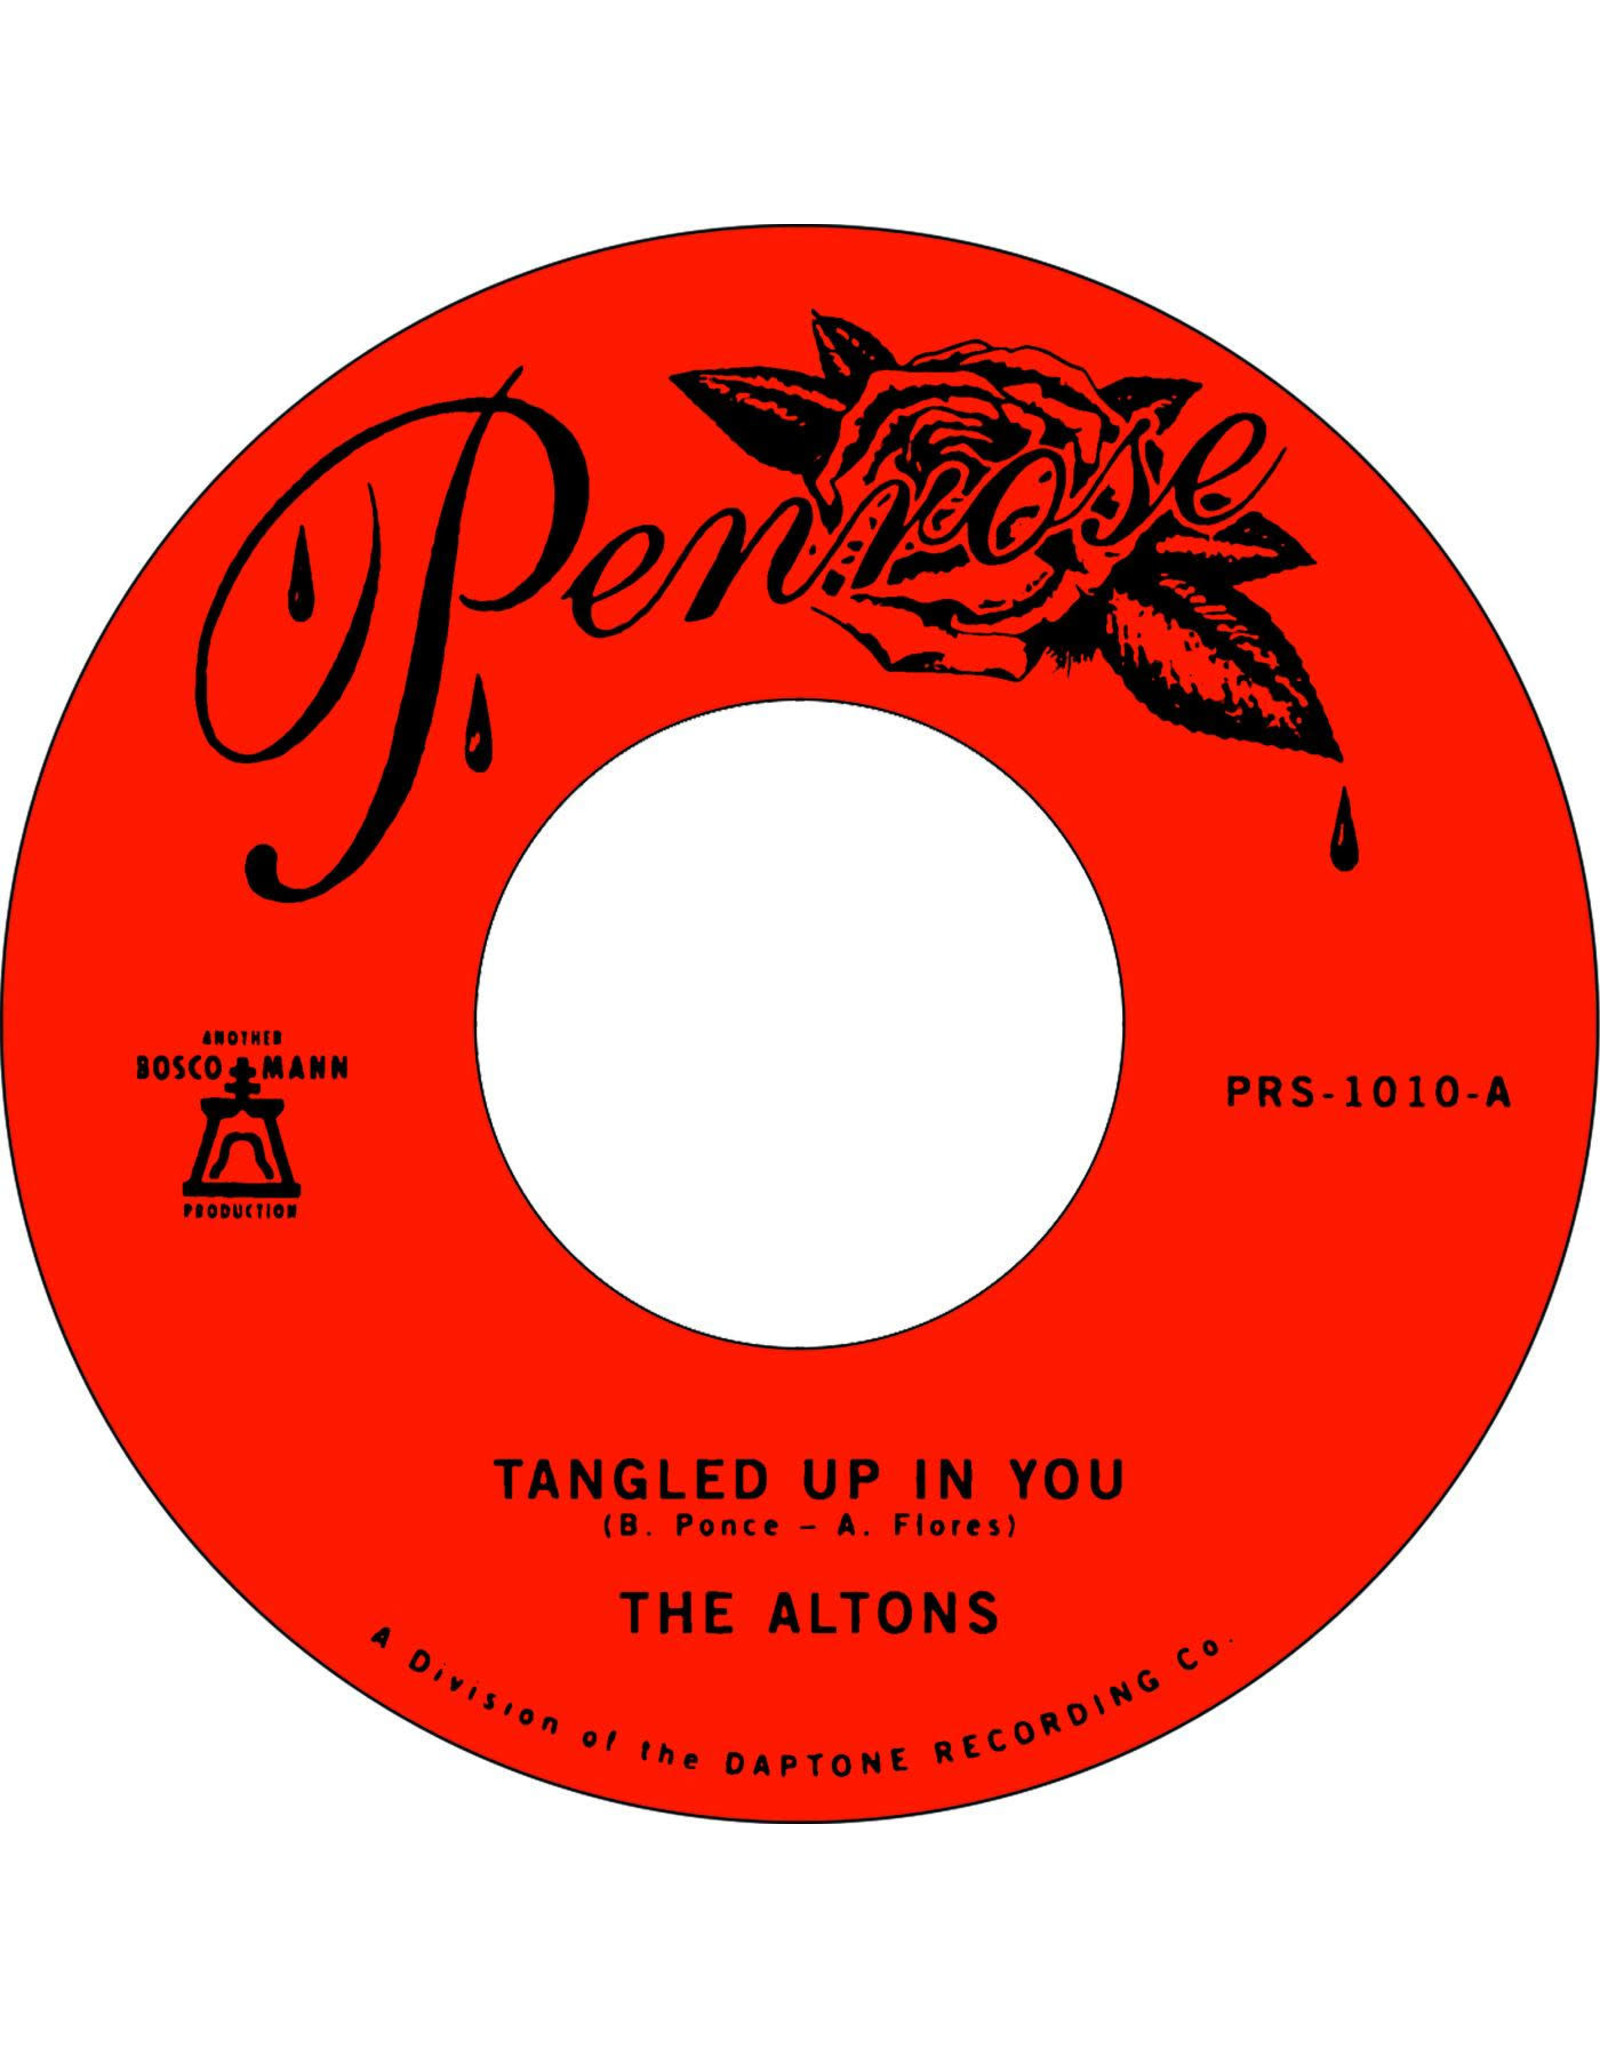 New Vinyl The Altons - Tangled Up In You b/w Soon Enough 7"